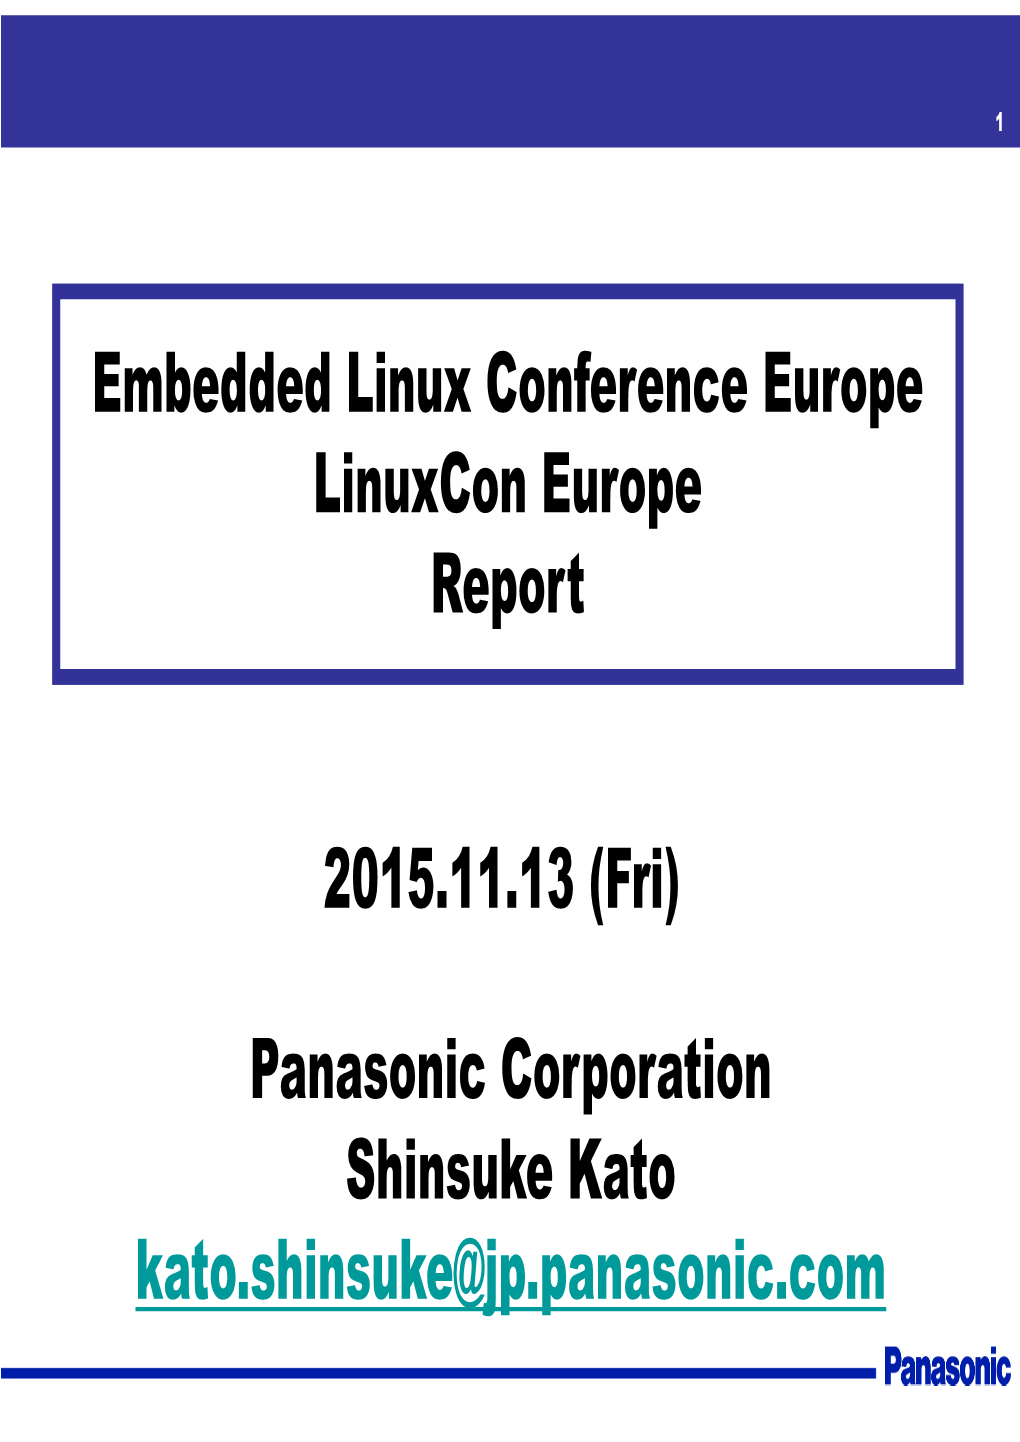 Embedded Linux Conference Europe Linuxcon Europe Report